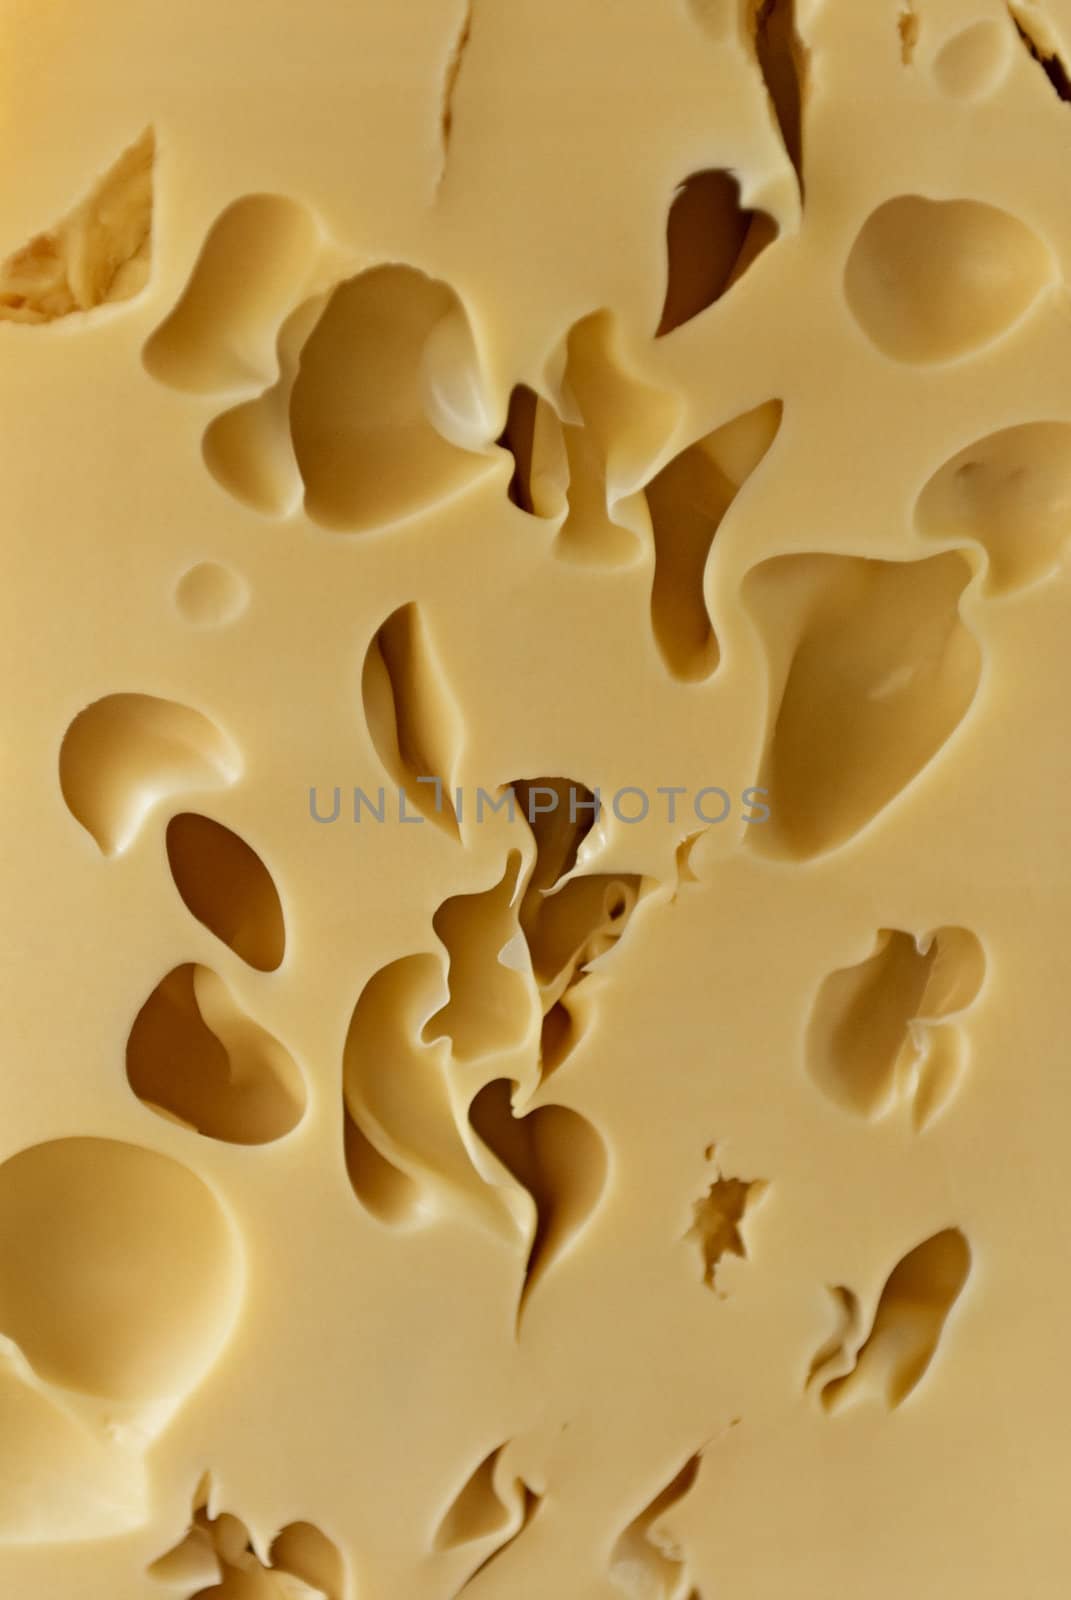 Cheese loaf whith holes. Close-up. by Kamensky